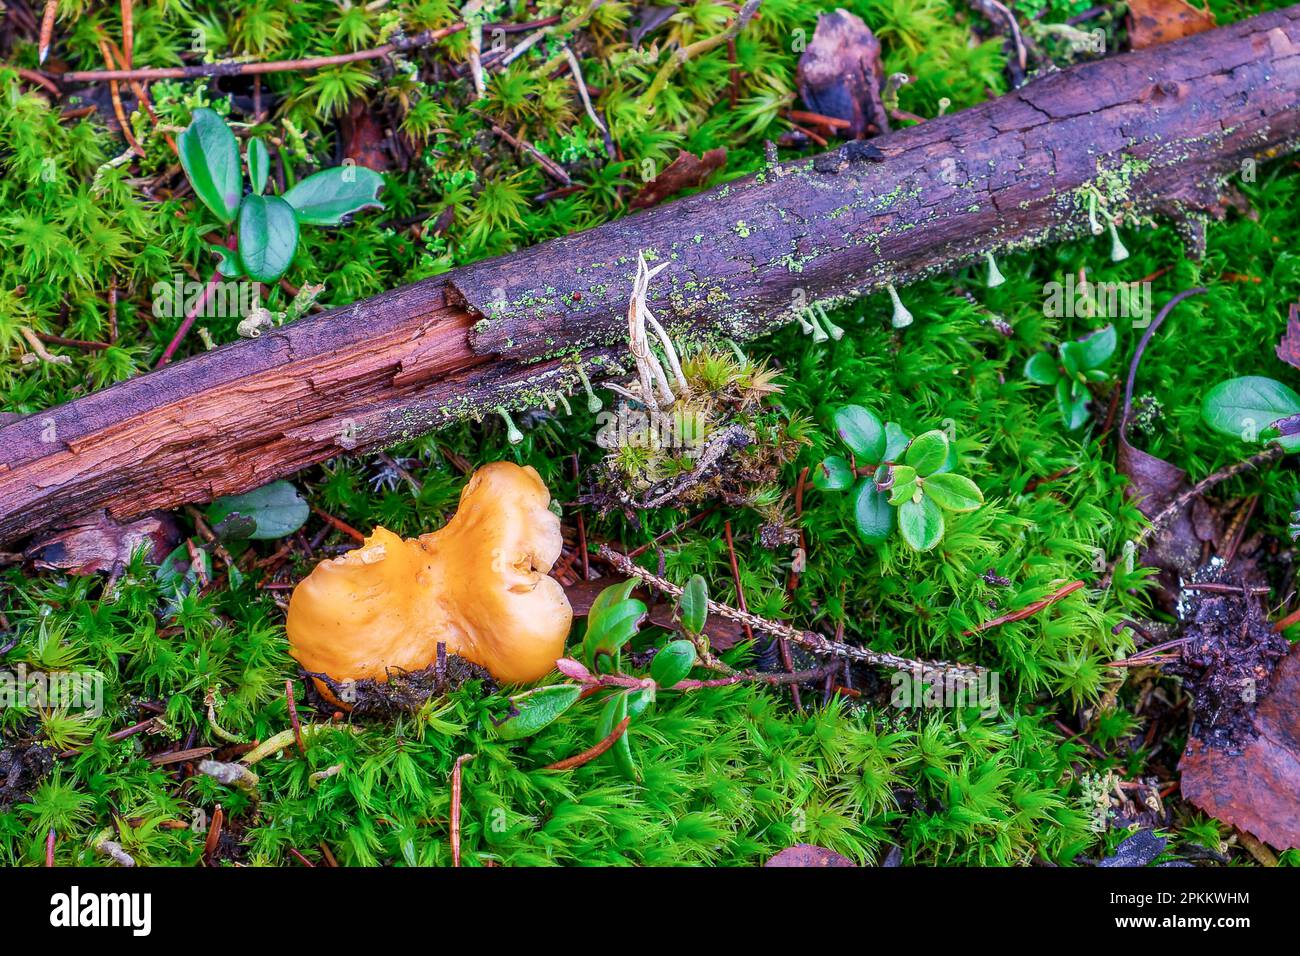 Forest Still Life. The yellow chanterelle mushroom grows among the tall, damp green moss in the forest. Top view Stock Photo